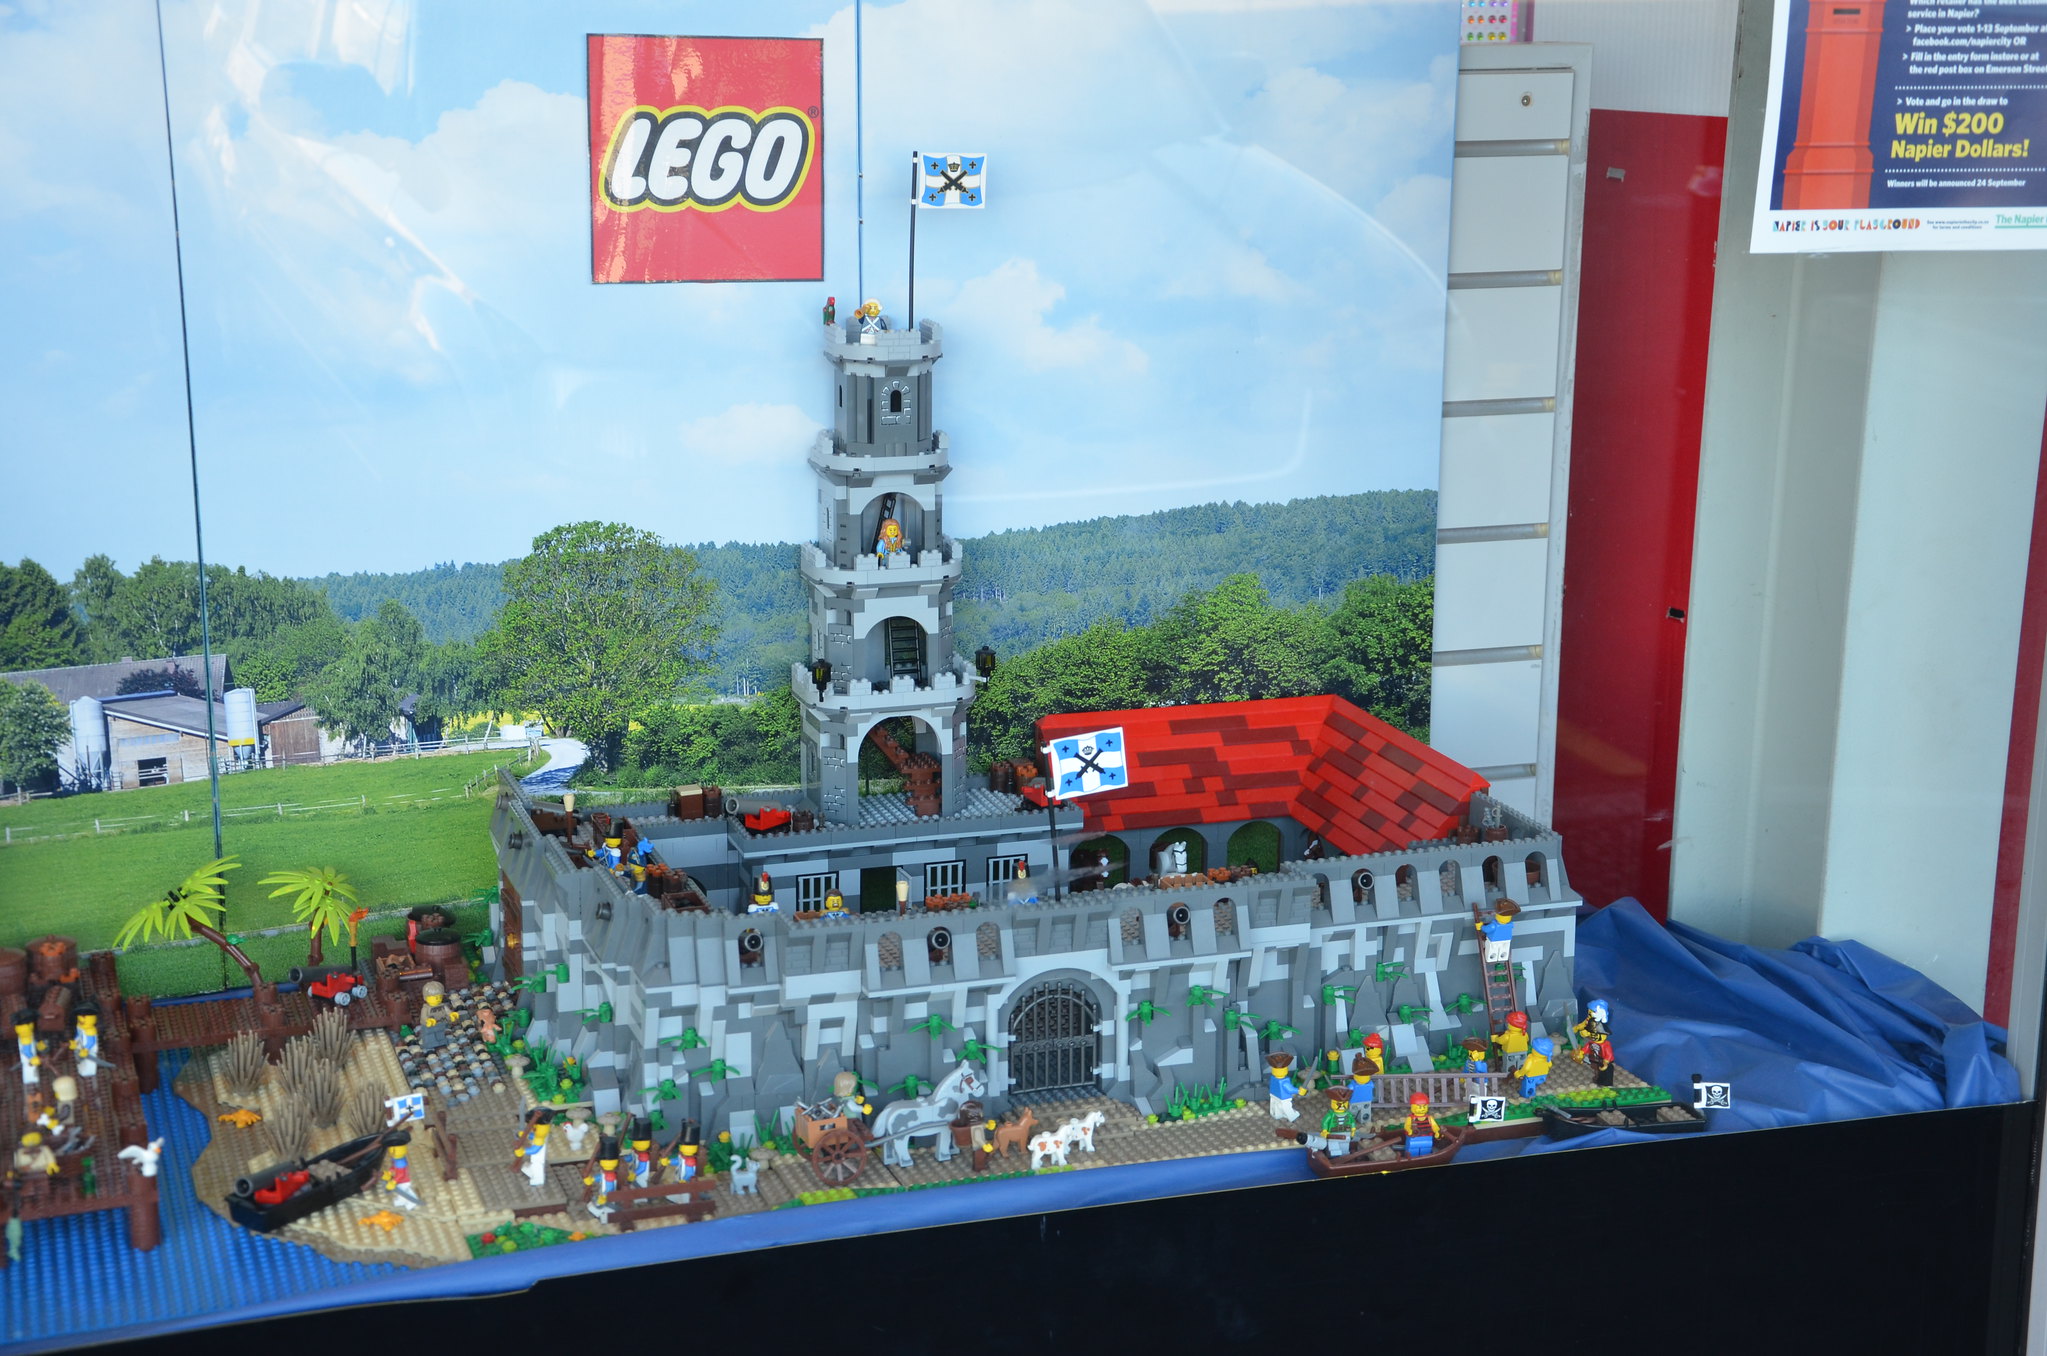 yet another LEGO day in napier - this time s window display that stayed weeks